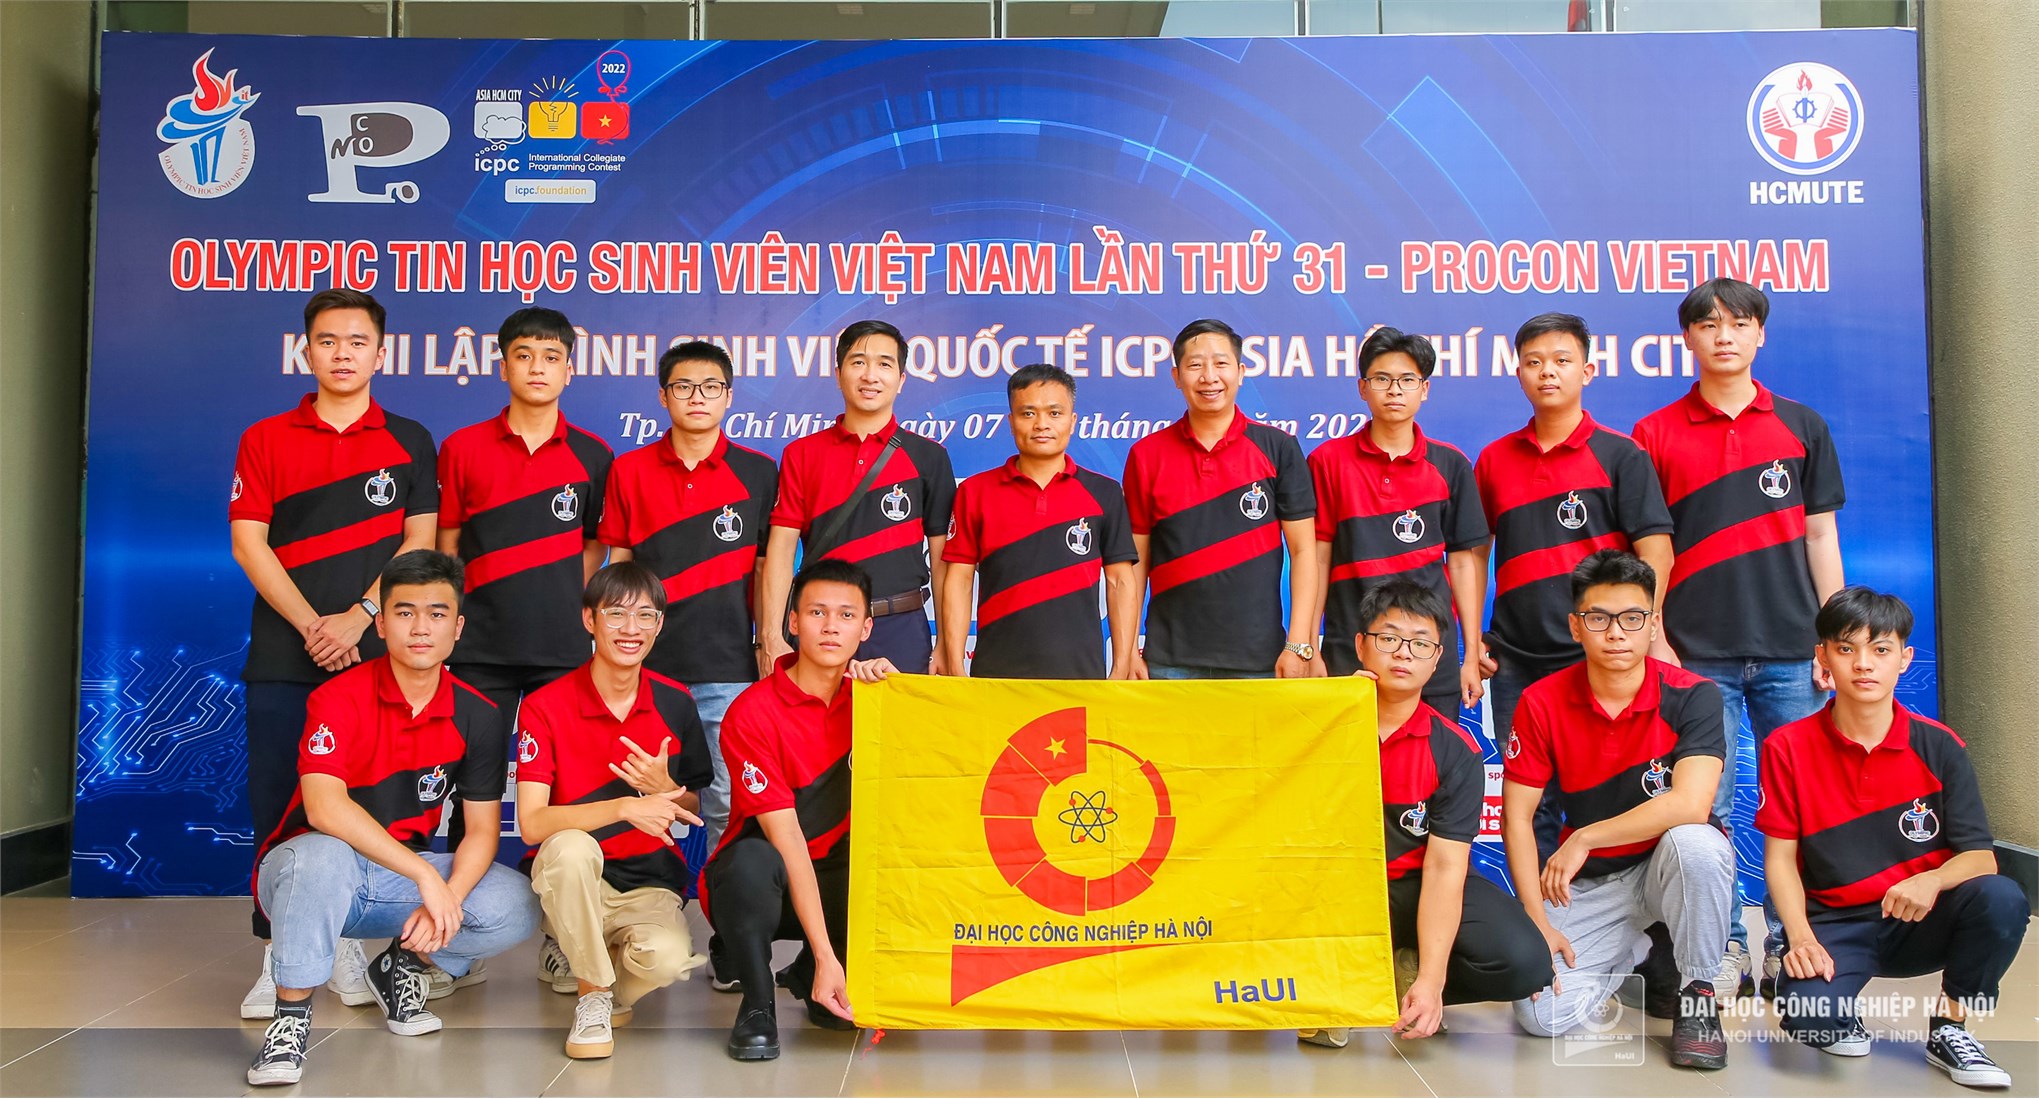 Students of Hanoi University of Industry achieved high results at the 31st Vietnam Student Informatics Olympiad